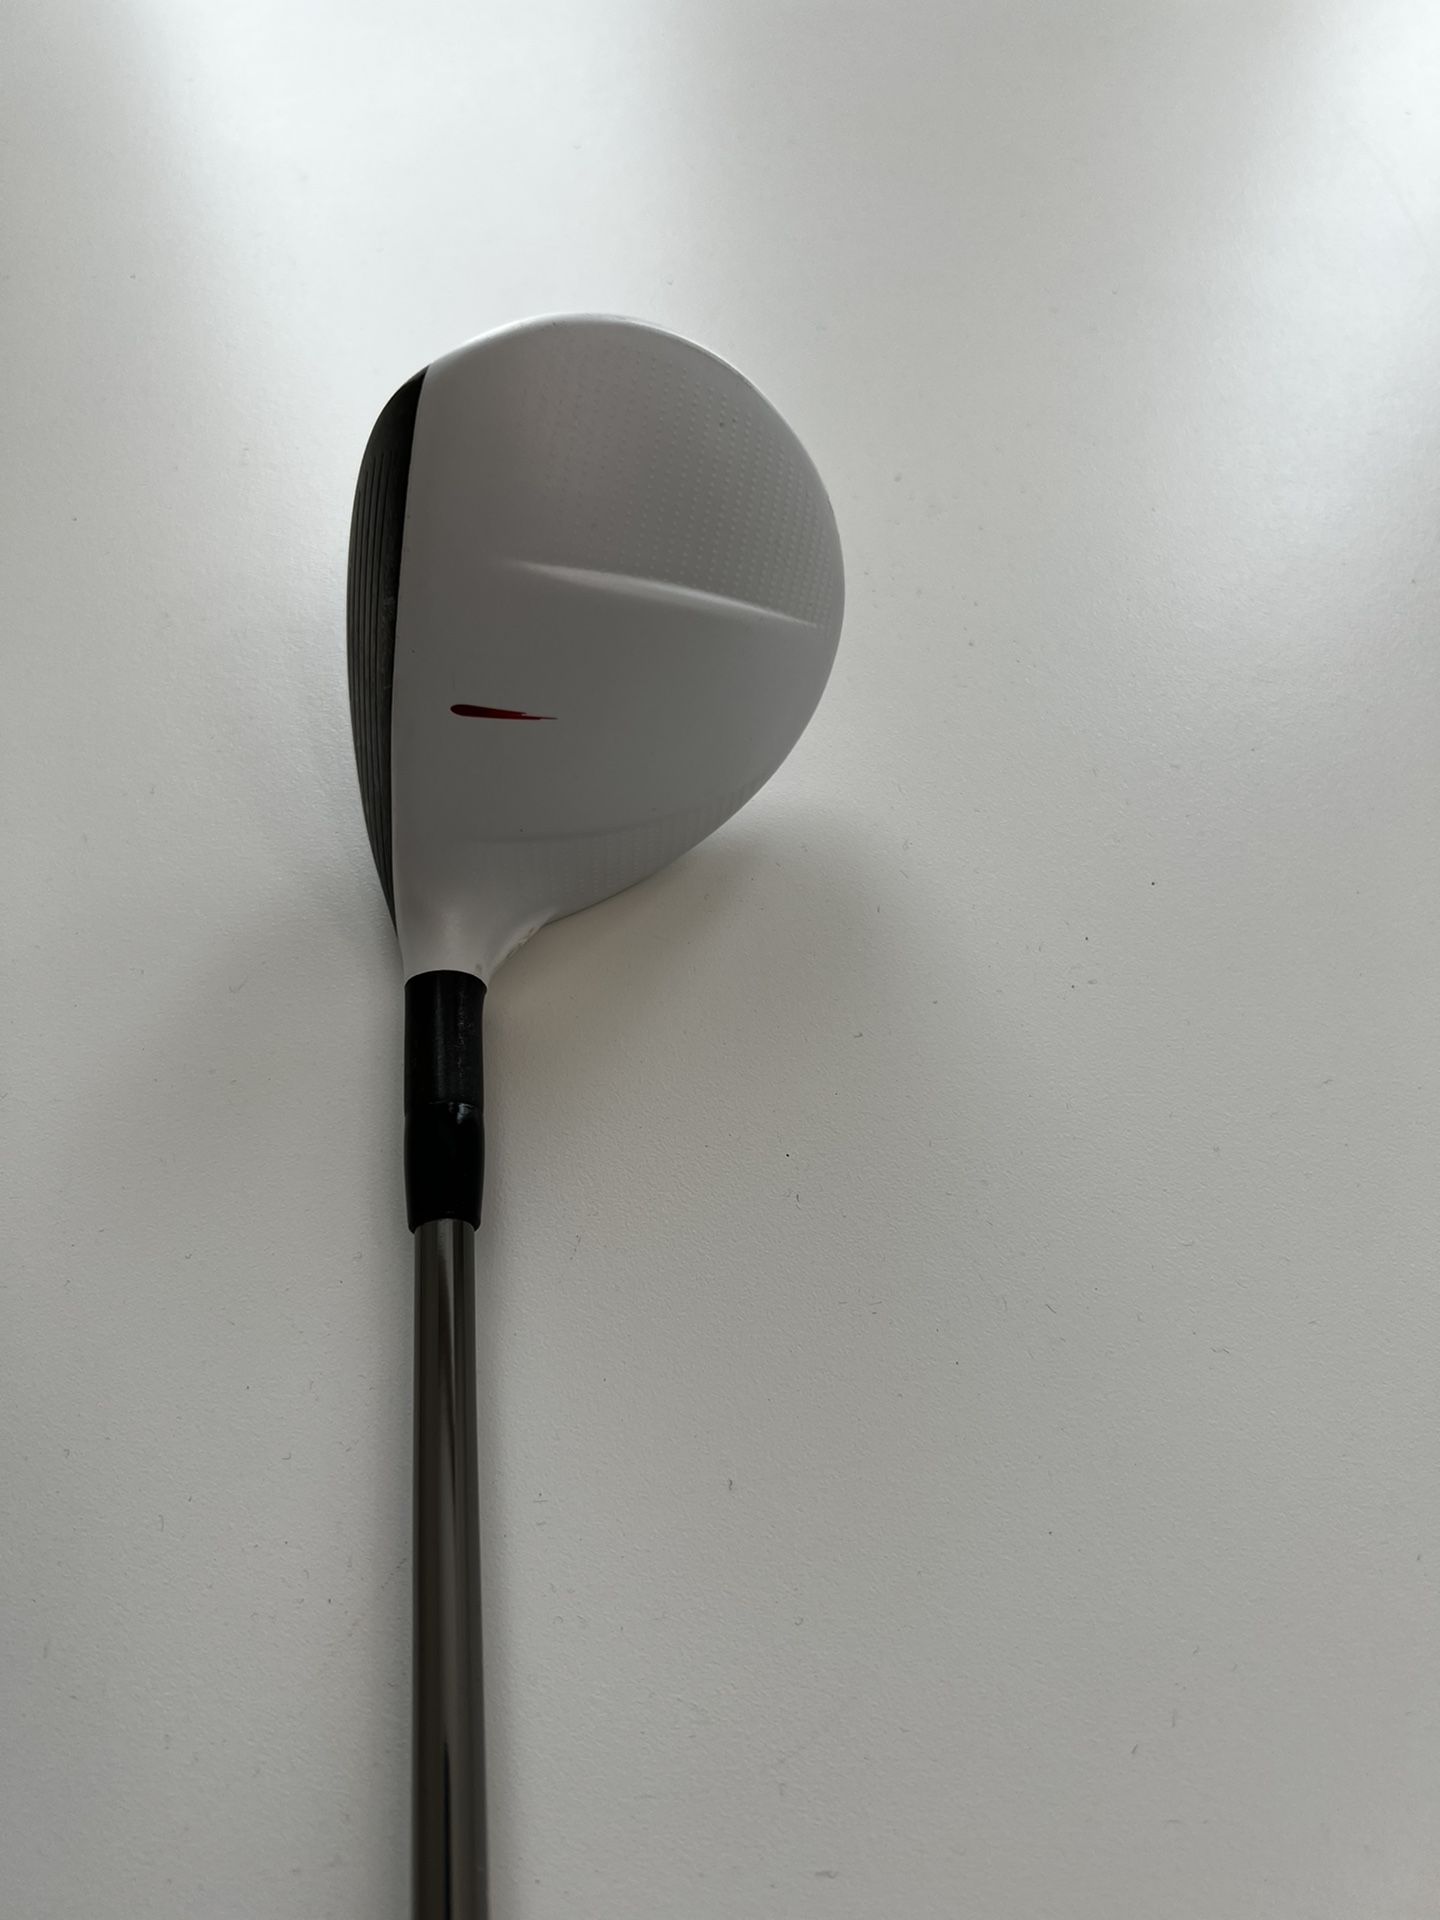 Taylormade Aero Burner TP 3 Wood 9F5T Shaft for Sale in Houston